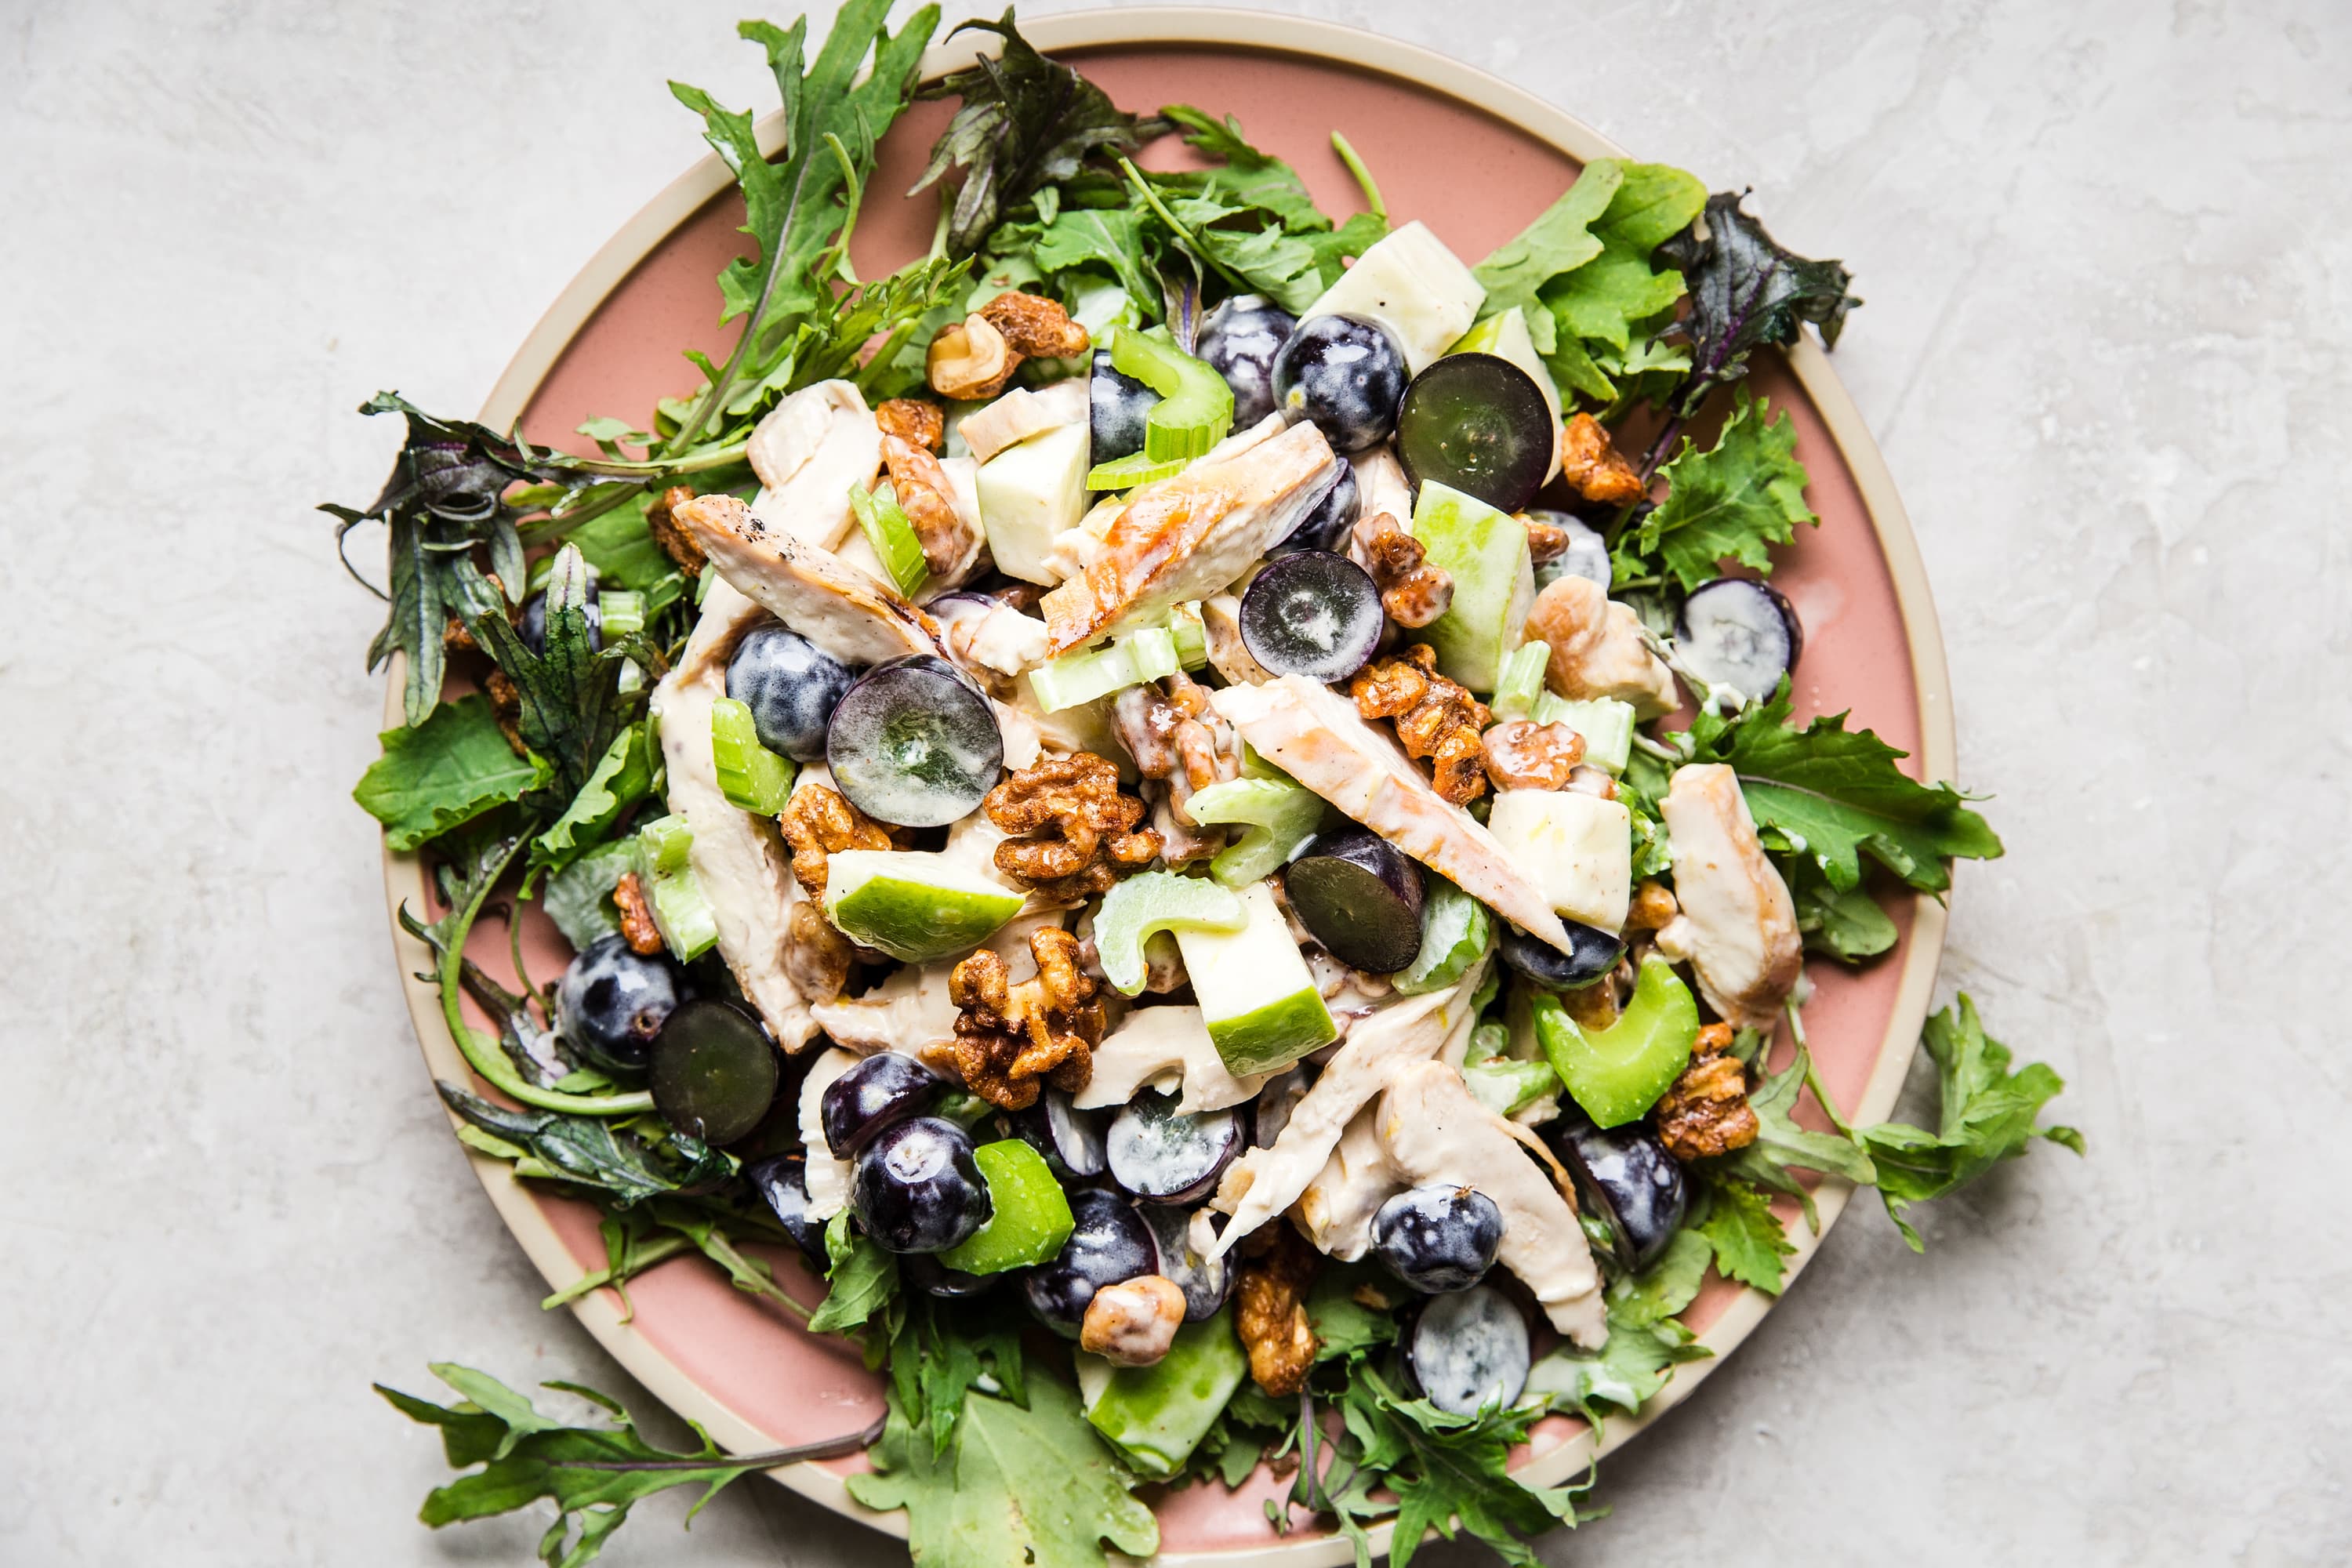 chicken waldorf salad with lettuce, chicken, grapes and celery